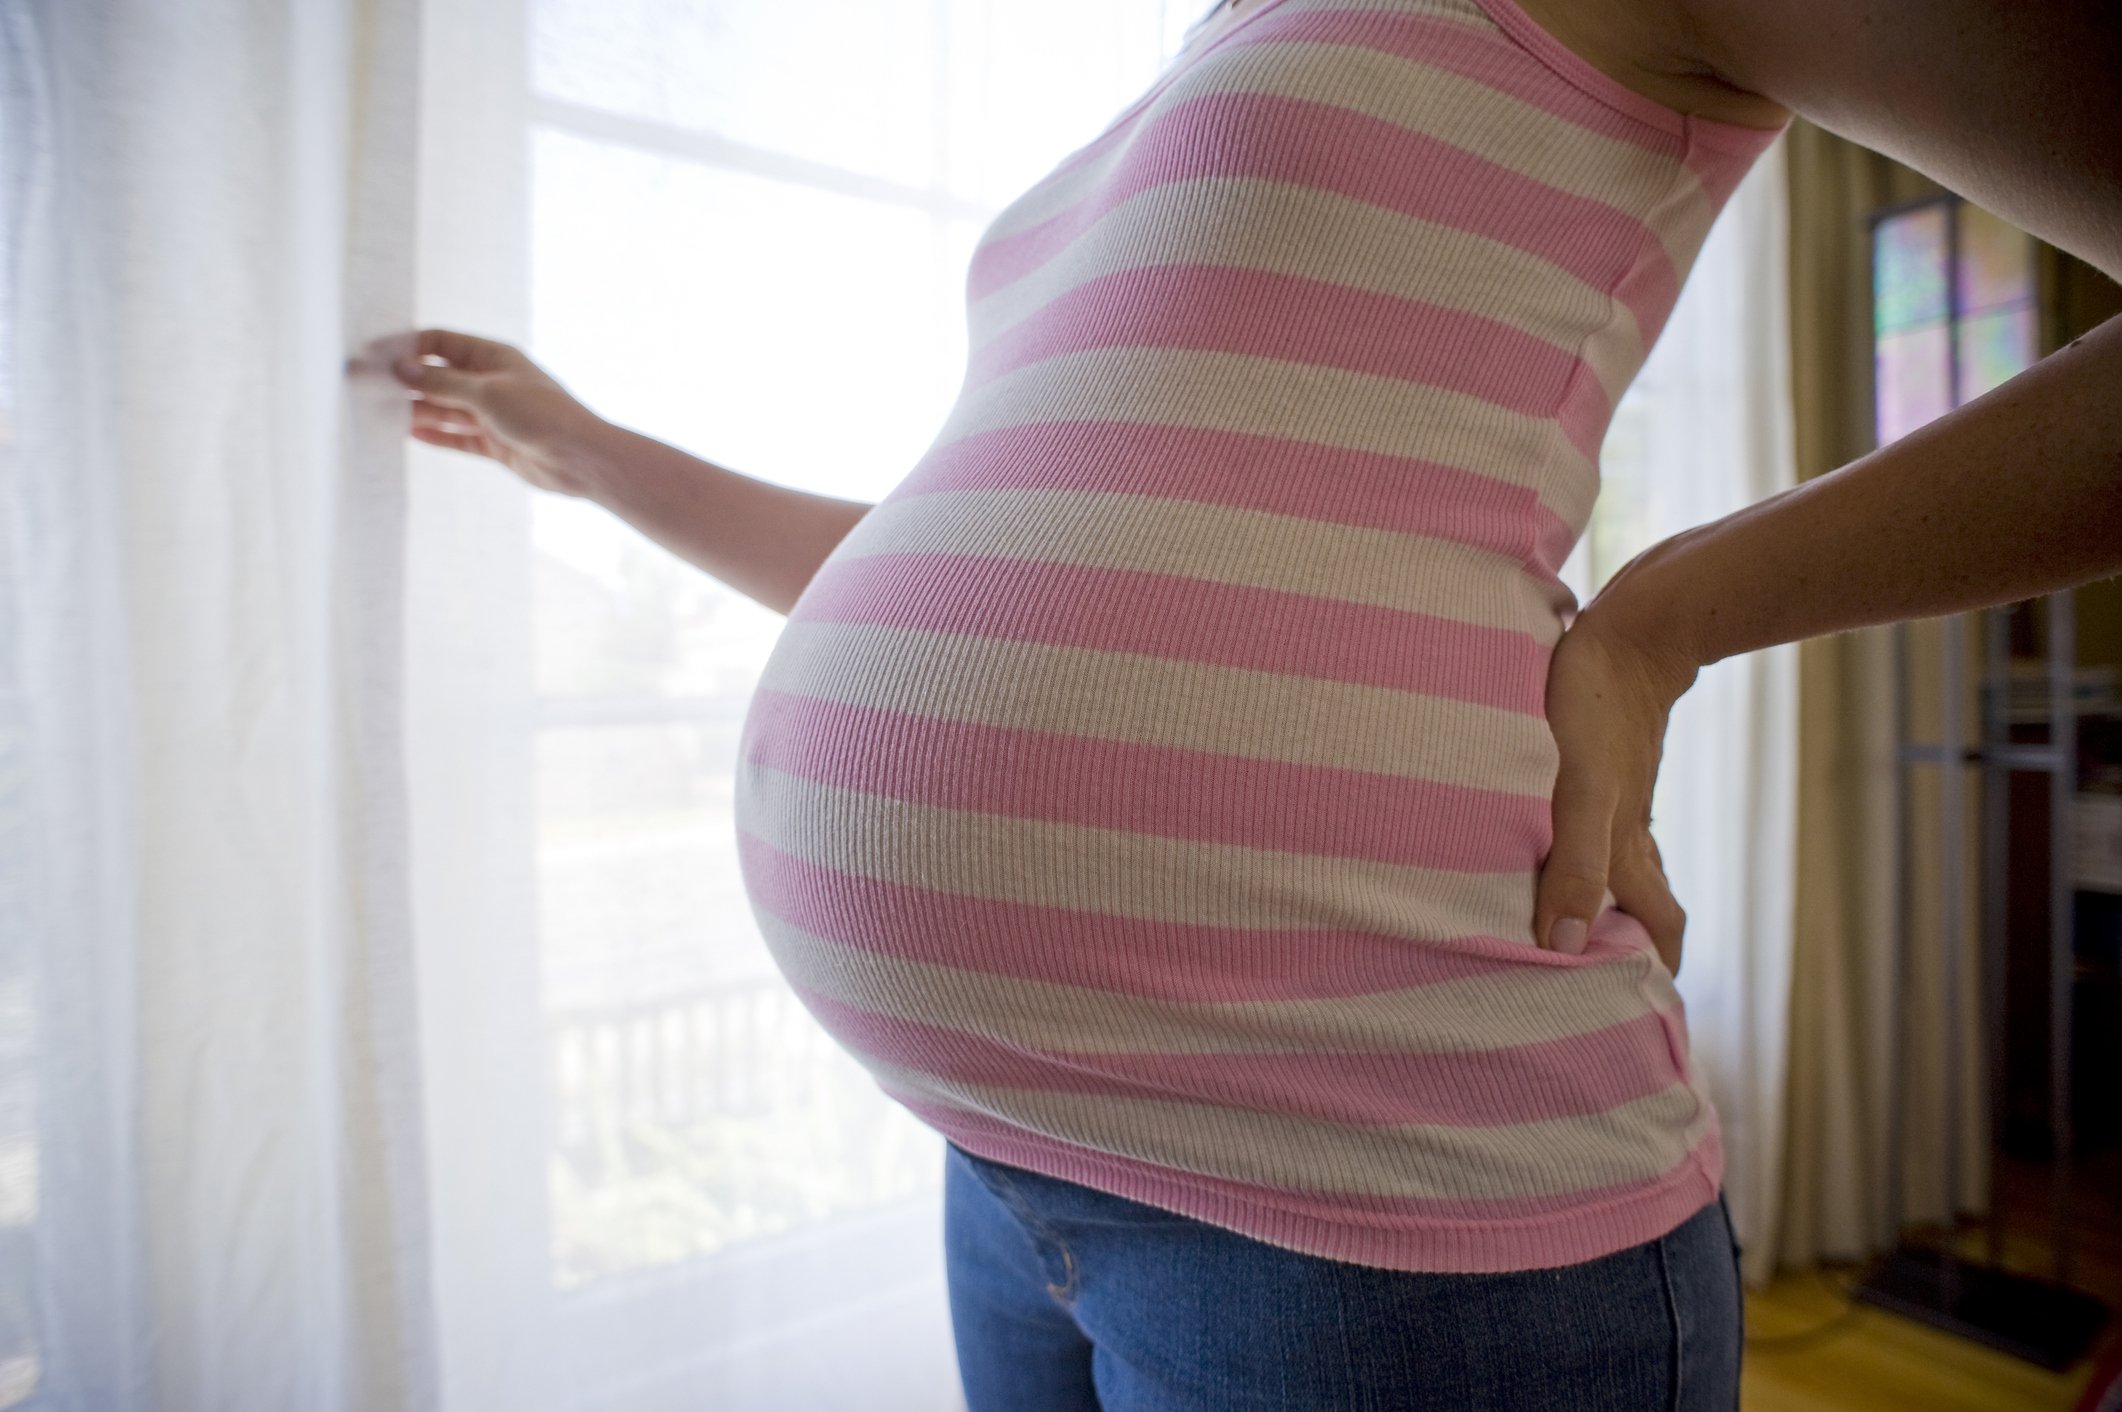 A pregnant woman by the window side. | Photo: Getty Images